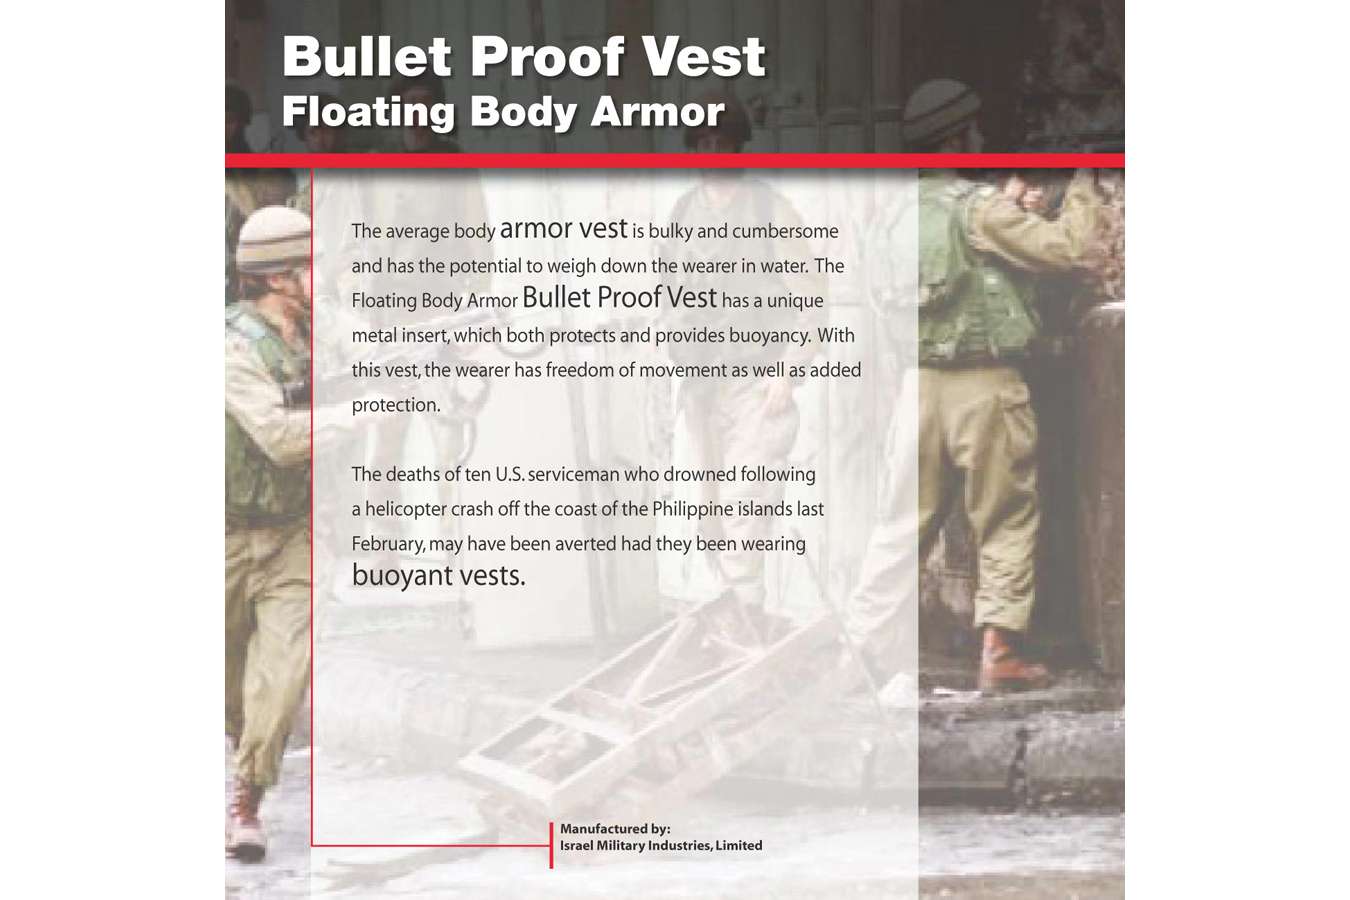 AIPST02_Vest : Explanatory panel for bullet proof vest in the ordinance gallery